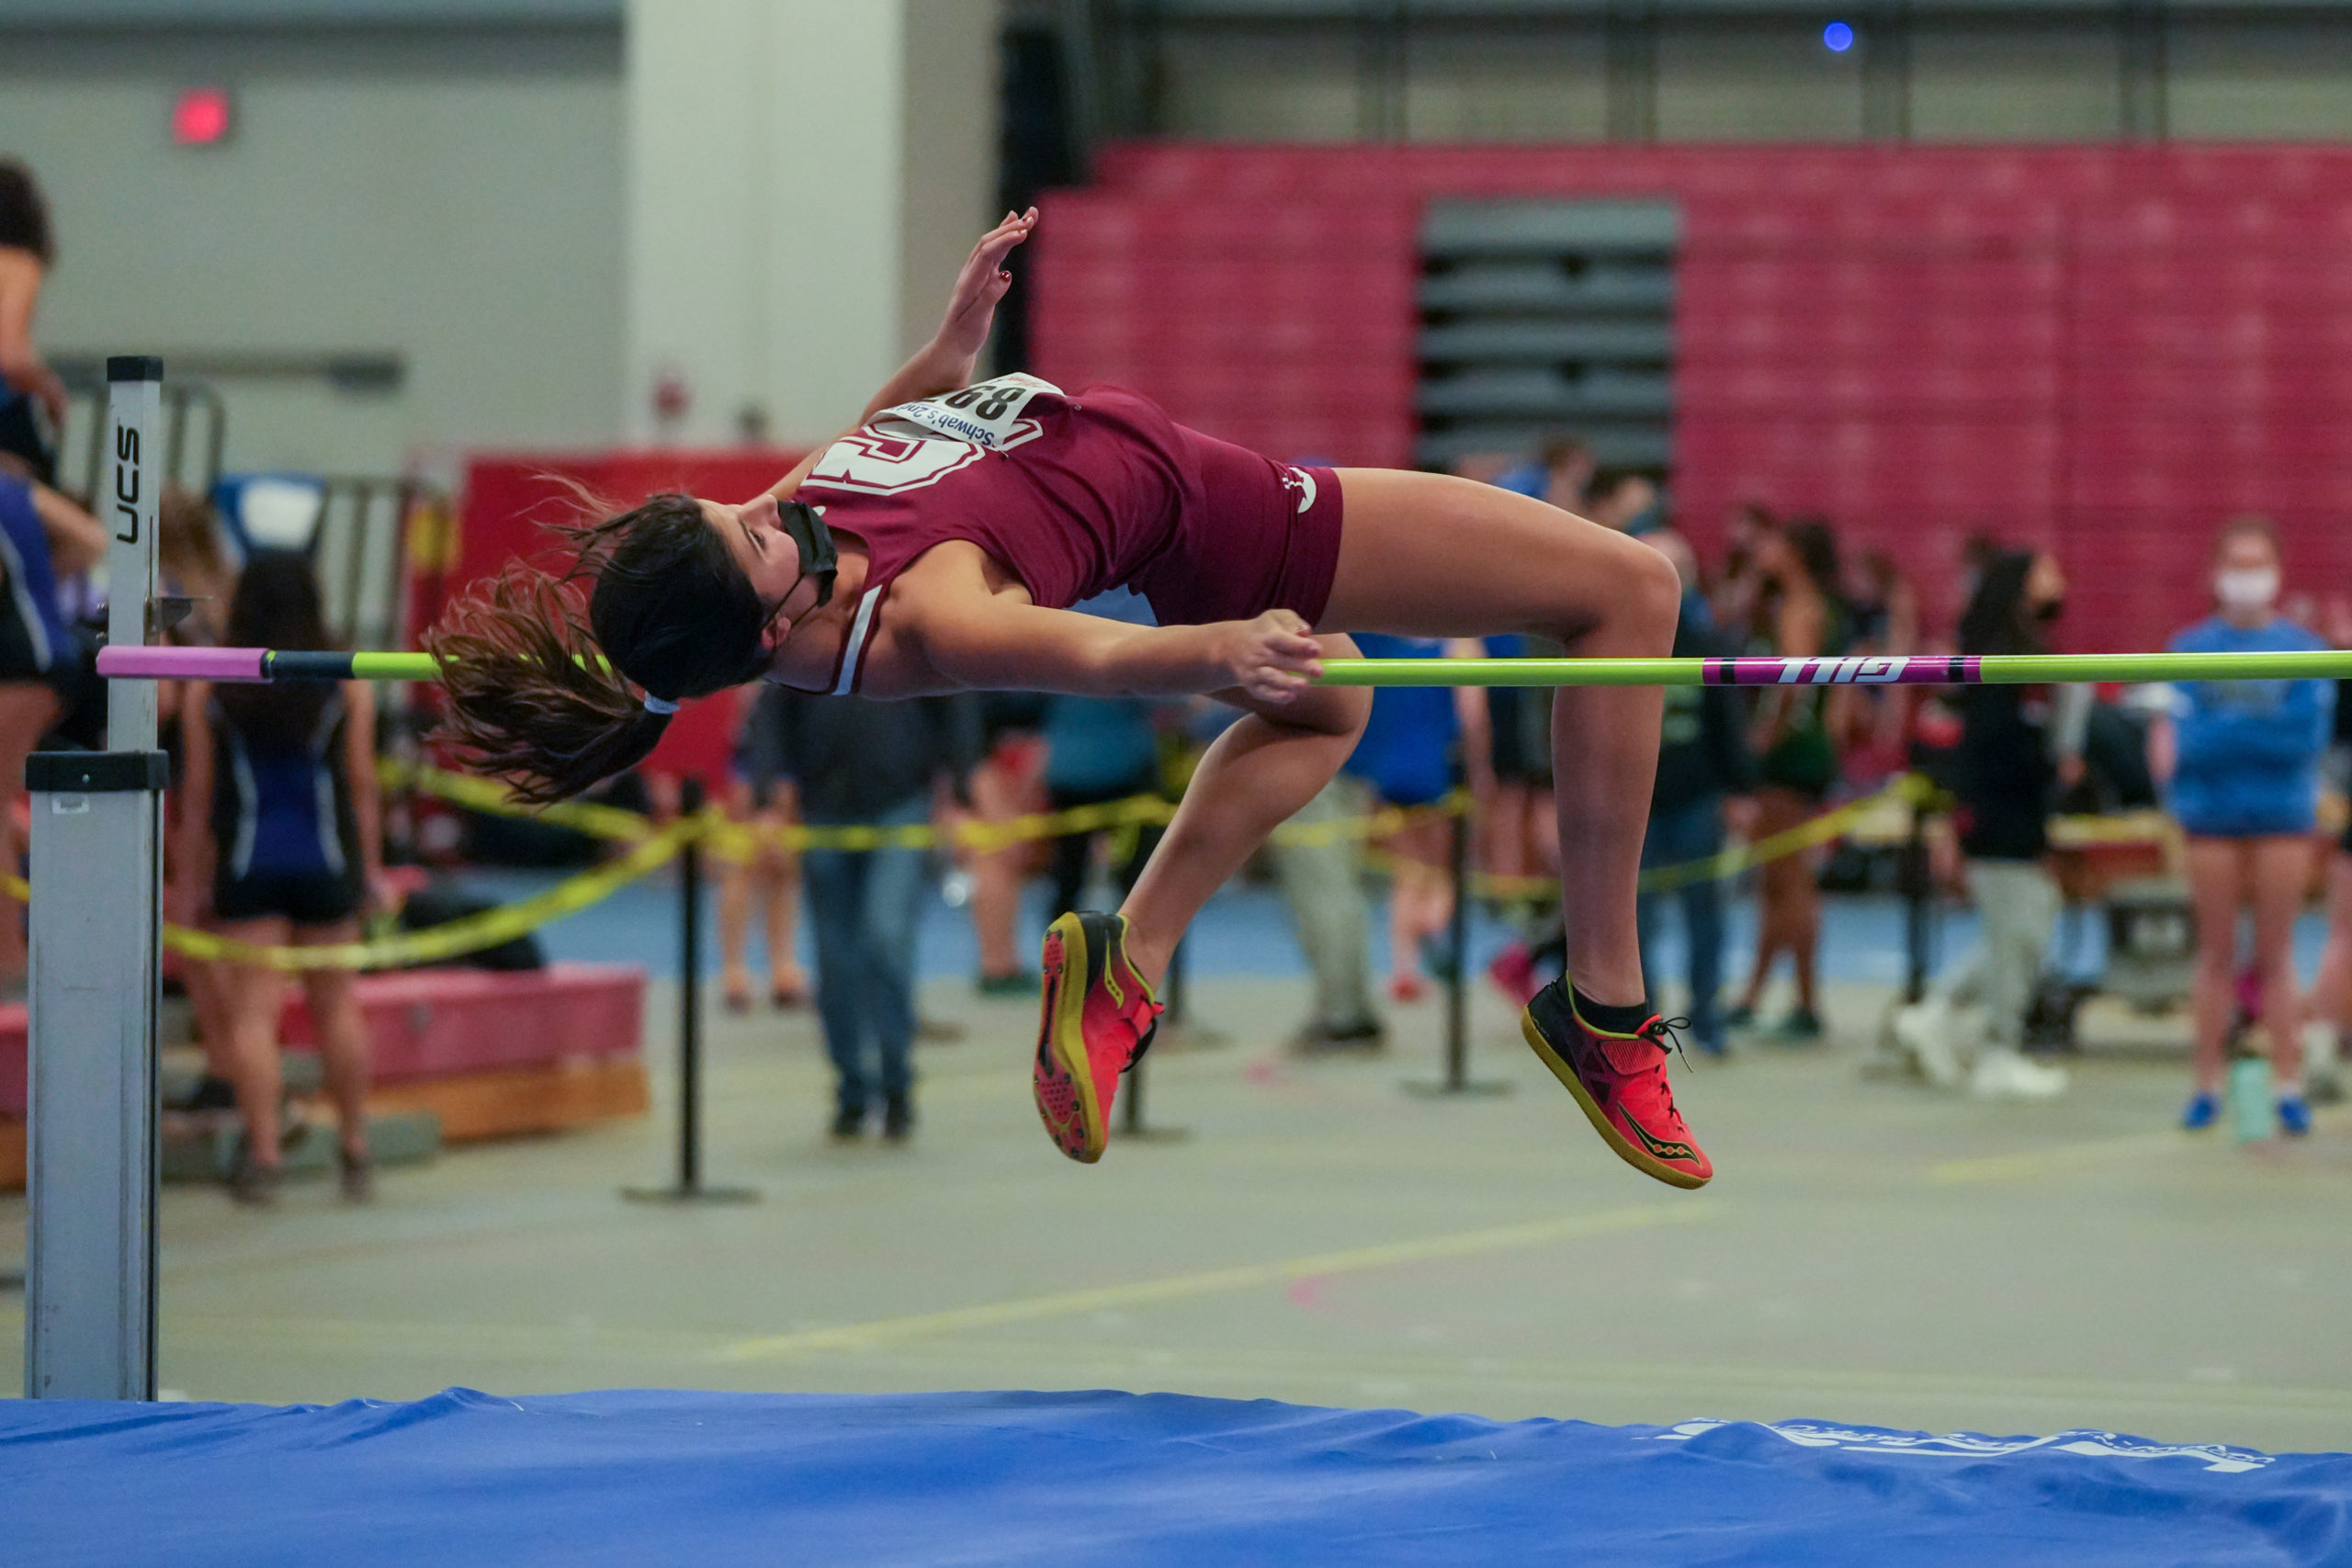 Southampton's Bridget Ferguson was one of just two girls at the Zeitler Relays to reach 5 feet in the high jump.